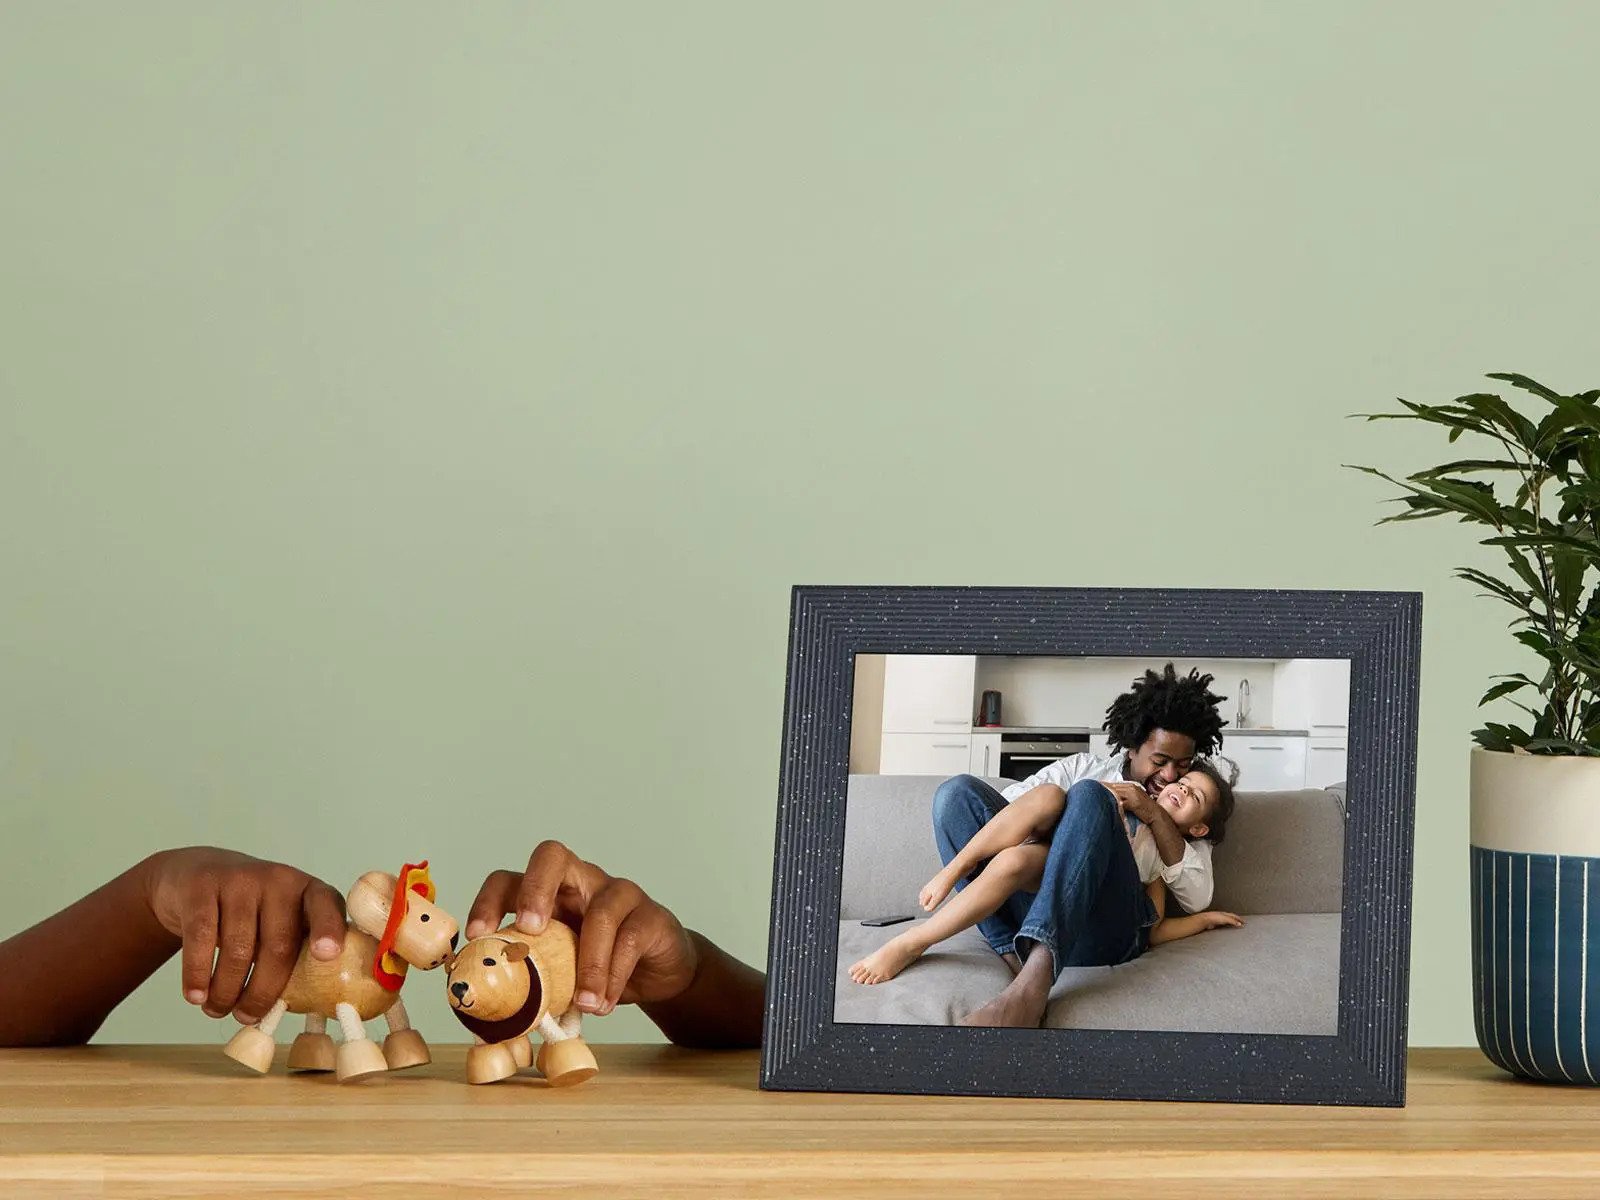 A photo frame displaying a father hugging his child